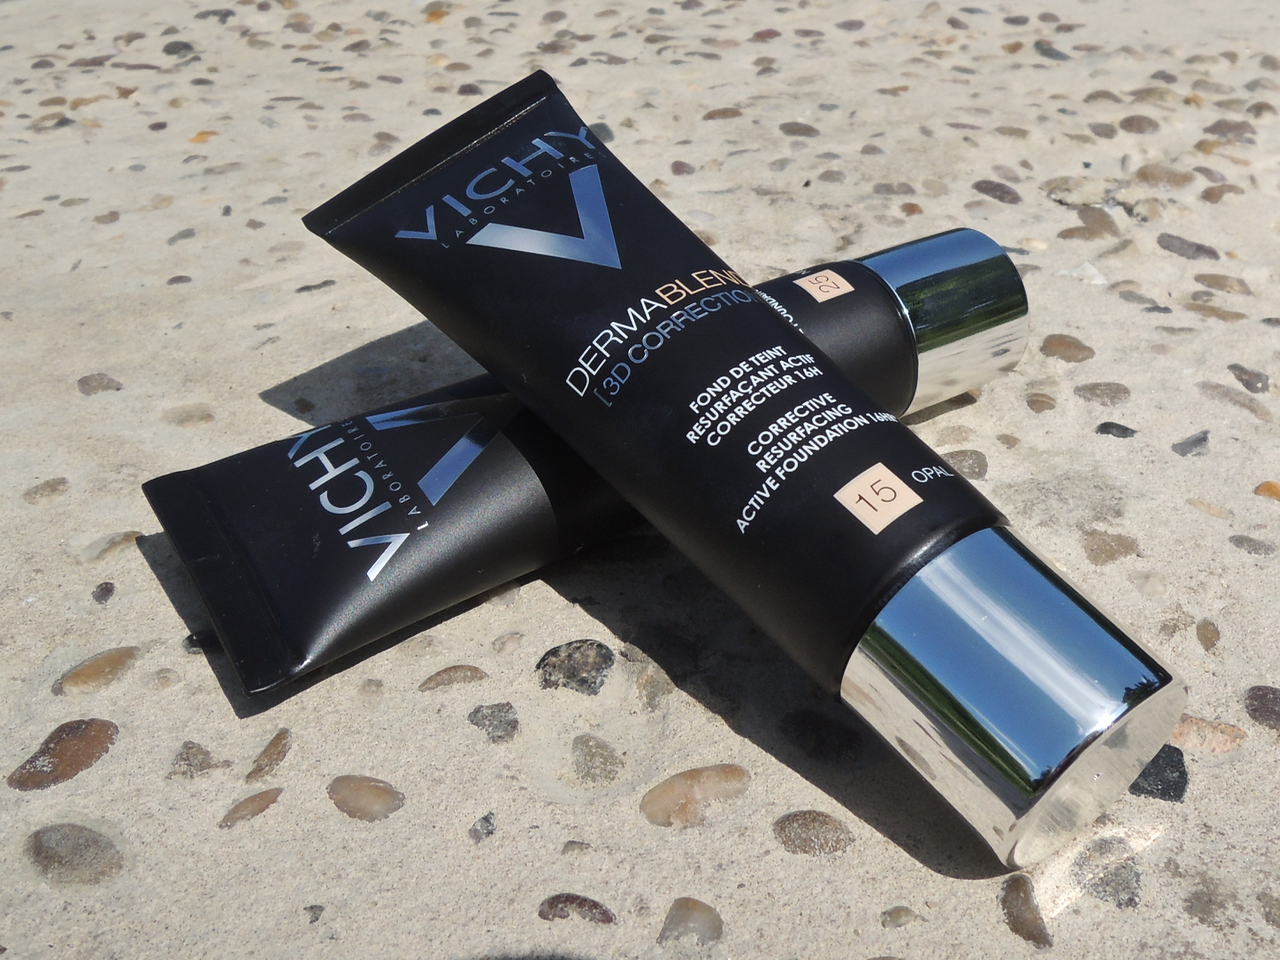 Vichy Dermablend 3D Review.